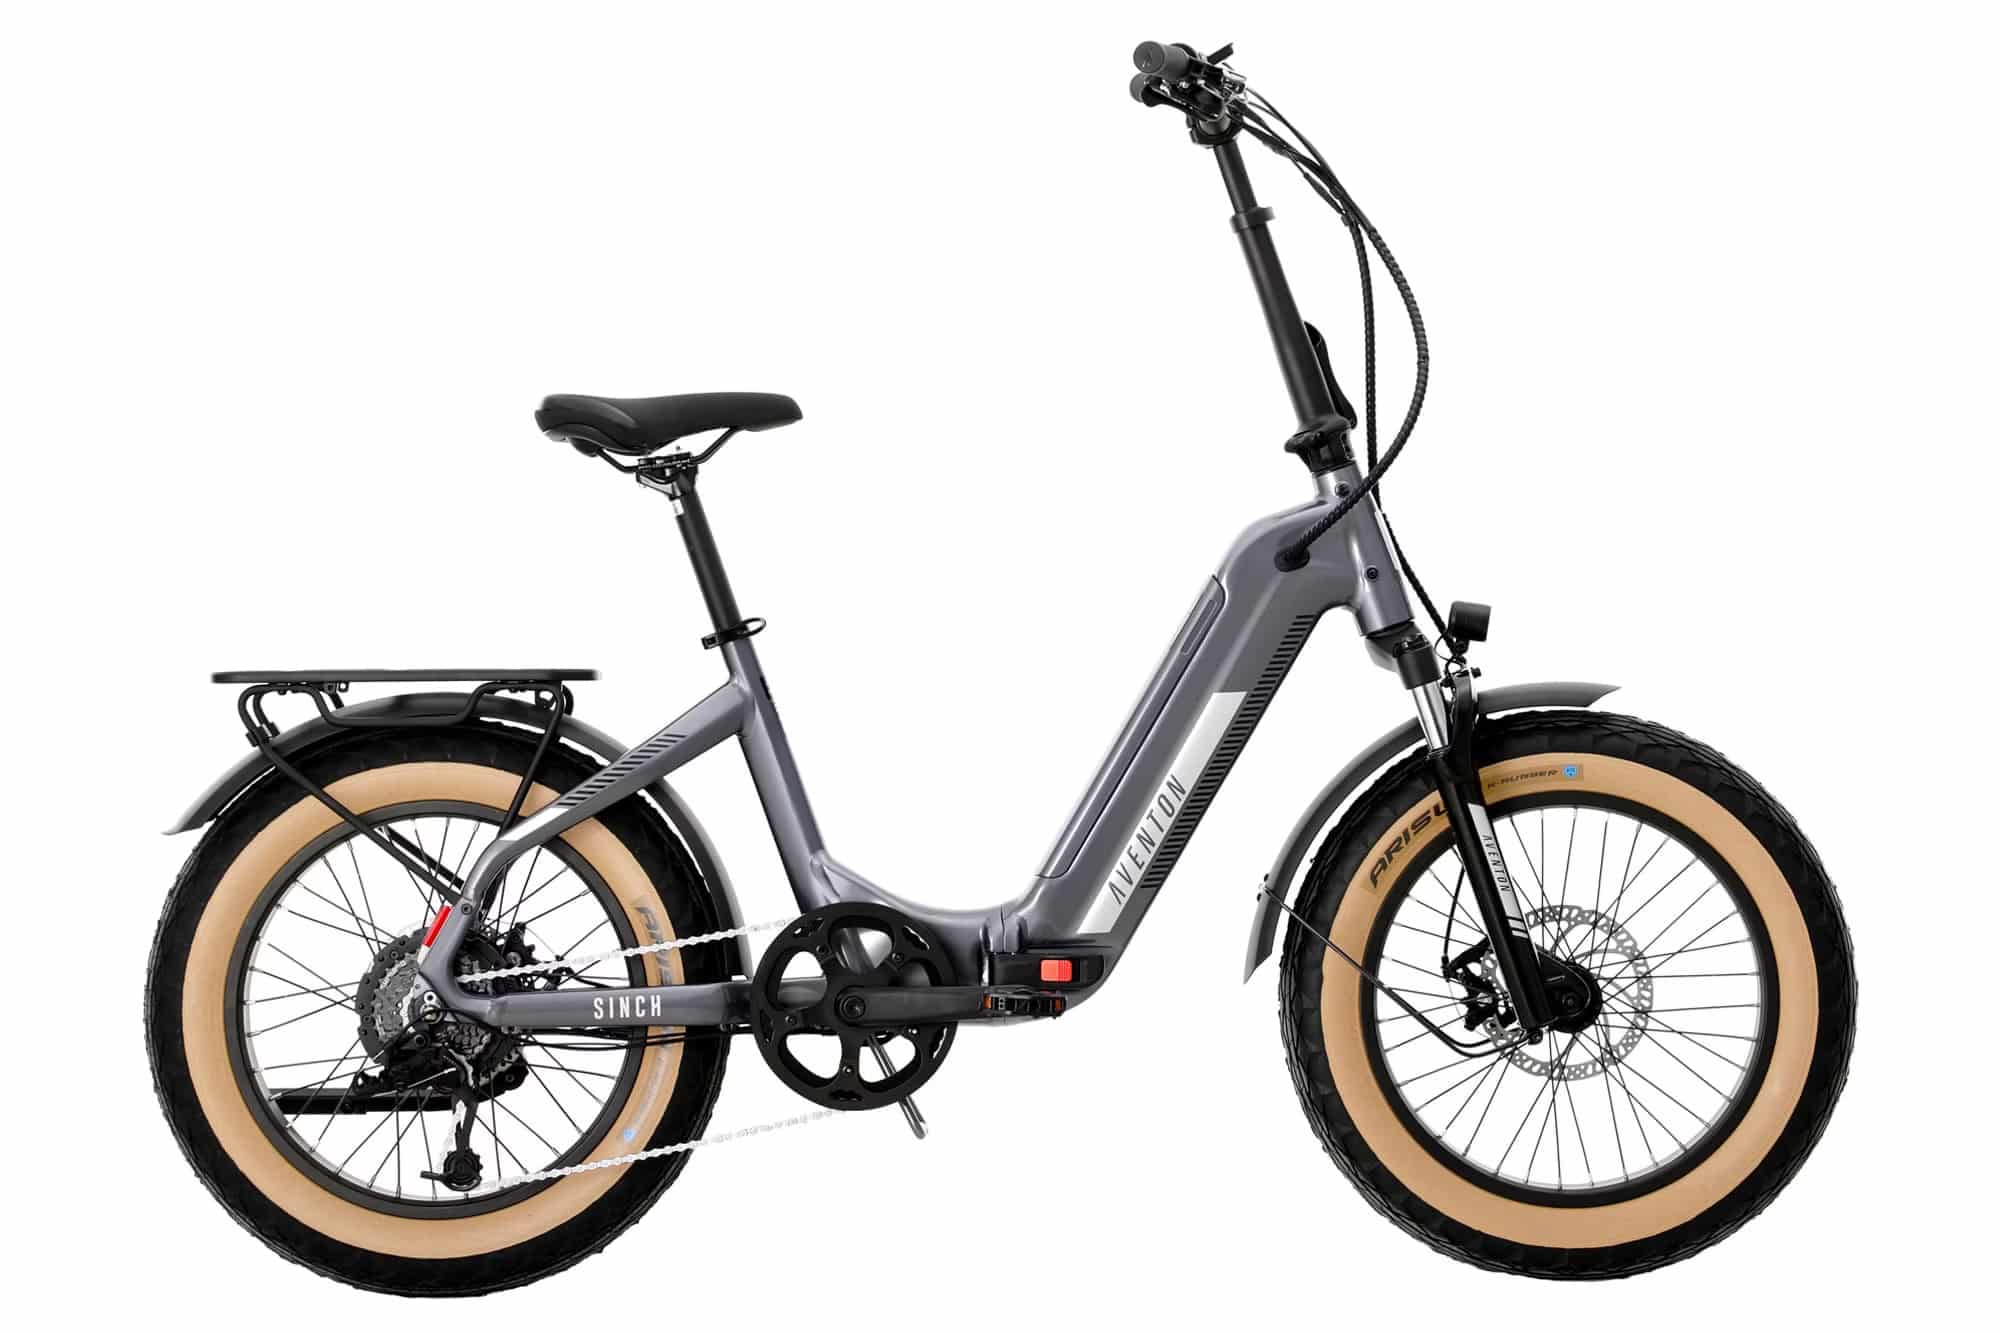 Motor Power: 500W, peaking at 750W<br>Speed: Top speed of 20 MPH<br>Range: 55 miles per charge<br>Battery: 48V, 14Ah<br>Payload Capacity: 300 lbs